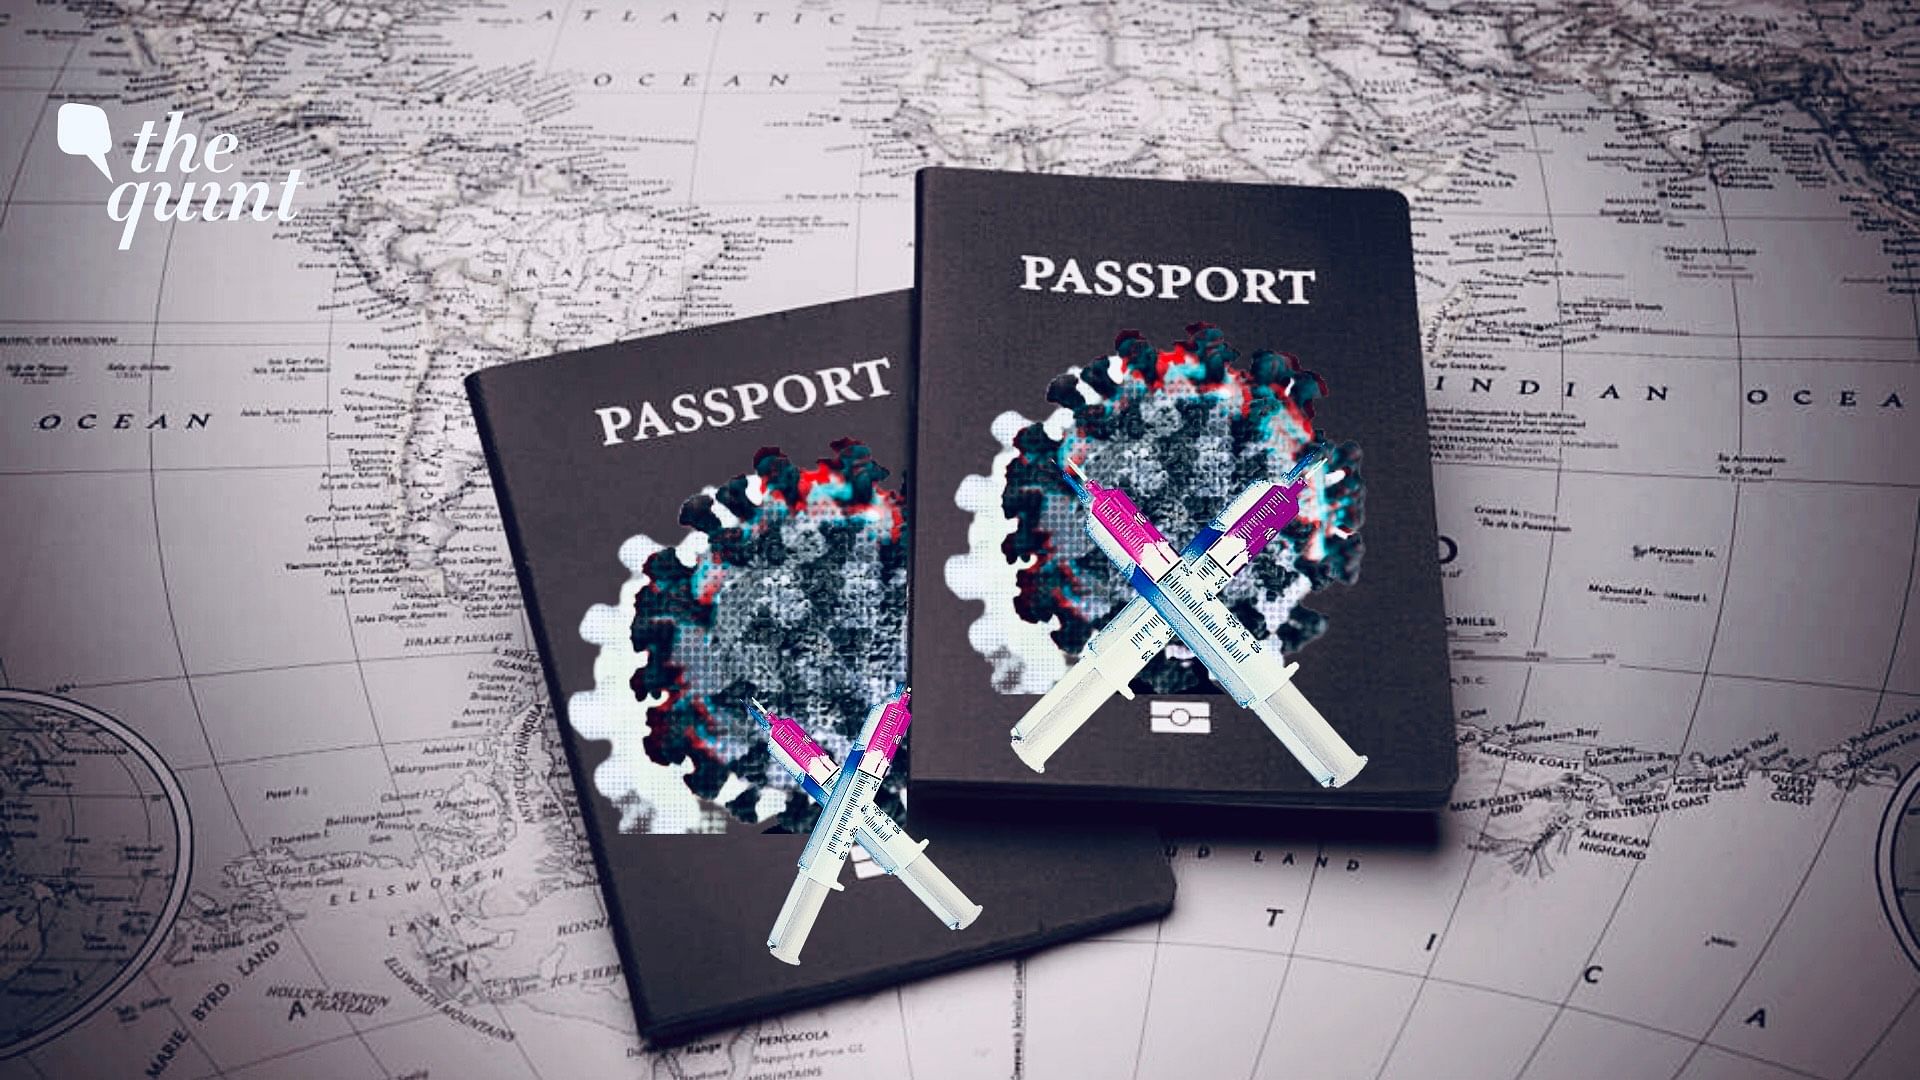 You can link your passport to your COVID-19 vaccine certificate through the CoWIN website.